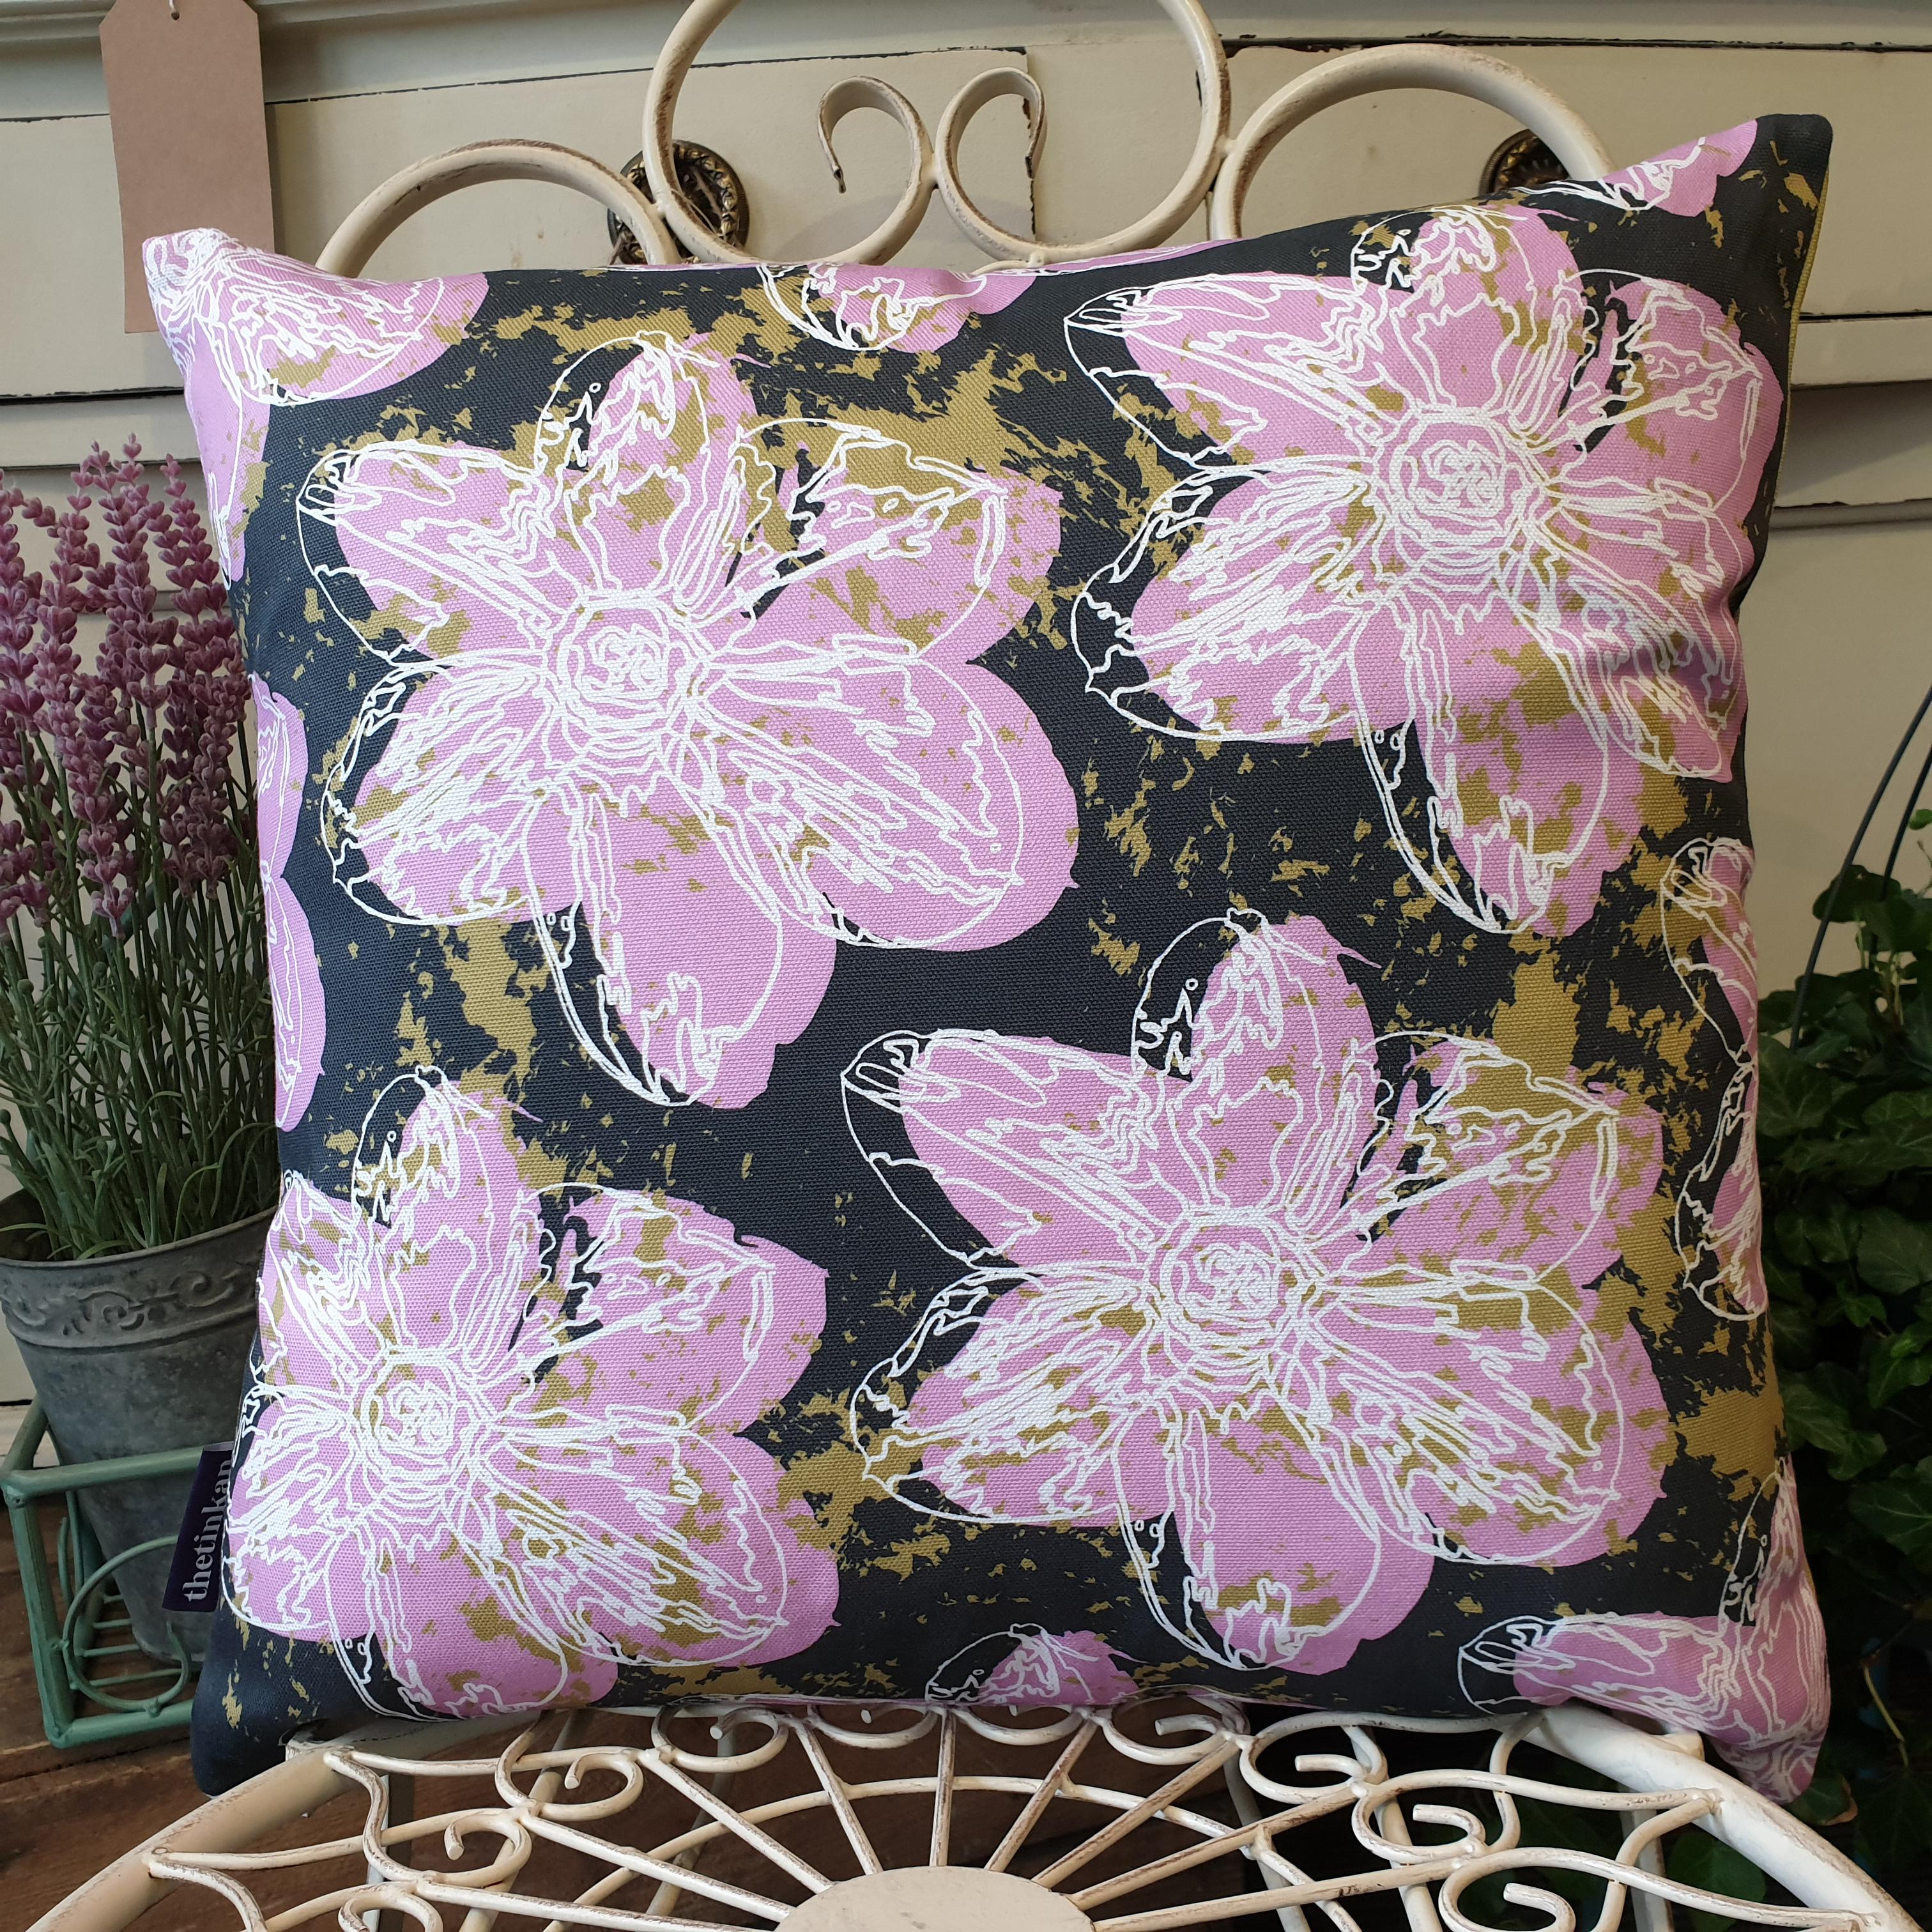 Double-sided 45cm square Flower Splash cushion designed by thetinkan. Candy pink narcissus flower with white traced outline set within a dark charcoal grey background with olive green paint splashes. Available with an optional luxury cushion inner pad. VIEW PRODUCT >>